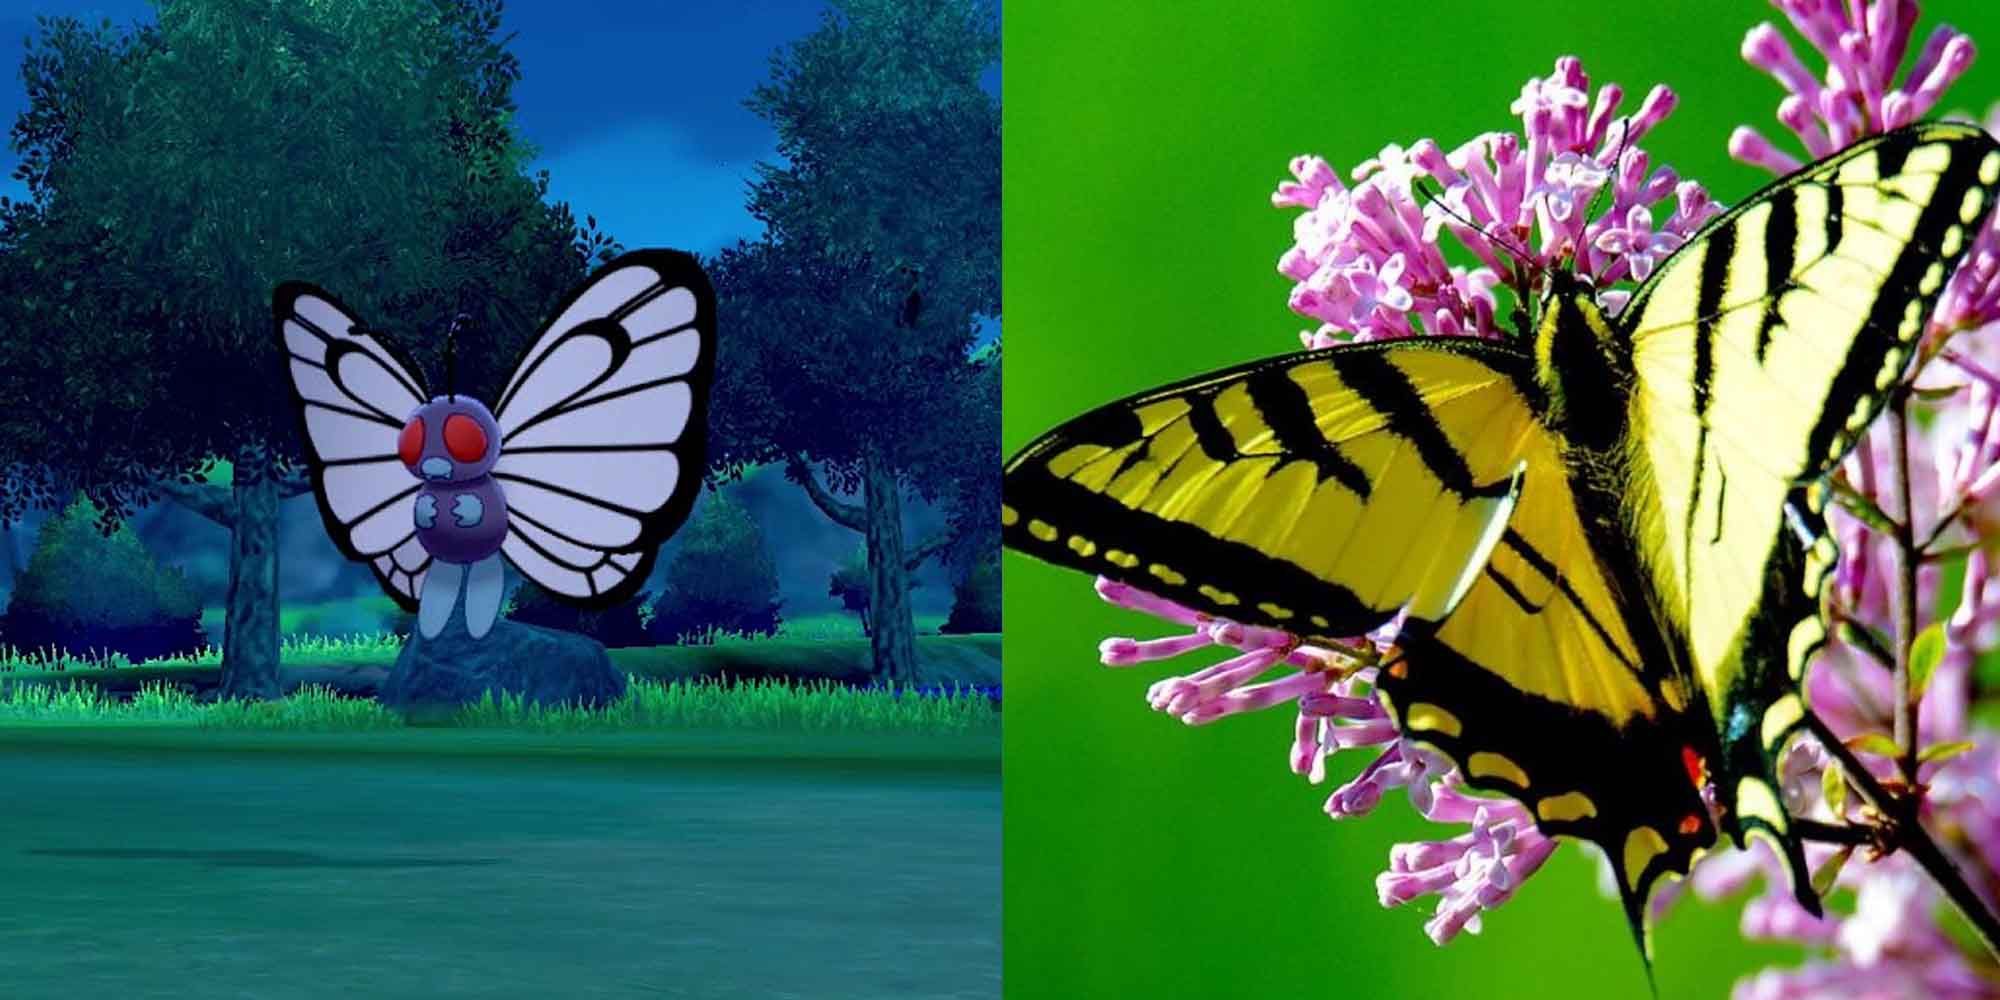 Butterfree Pokemon and a butterfly